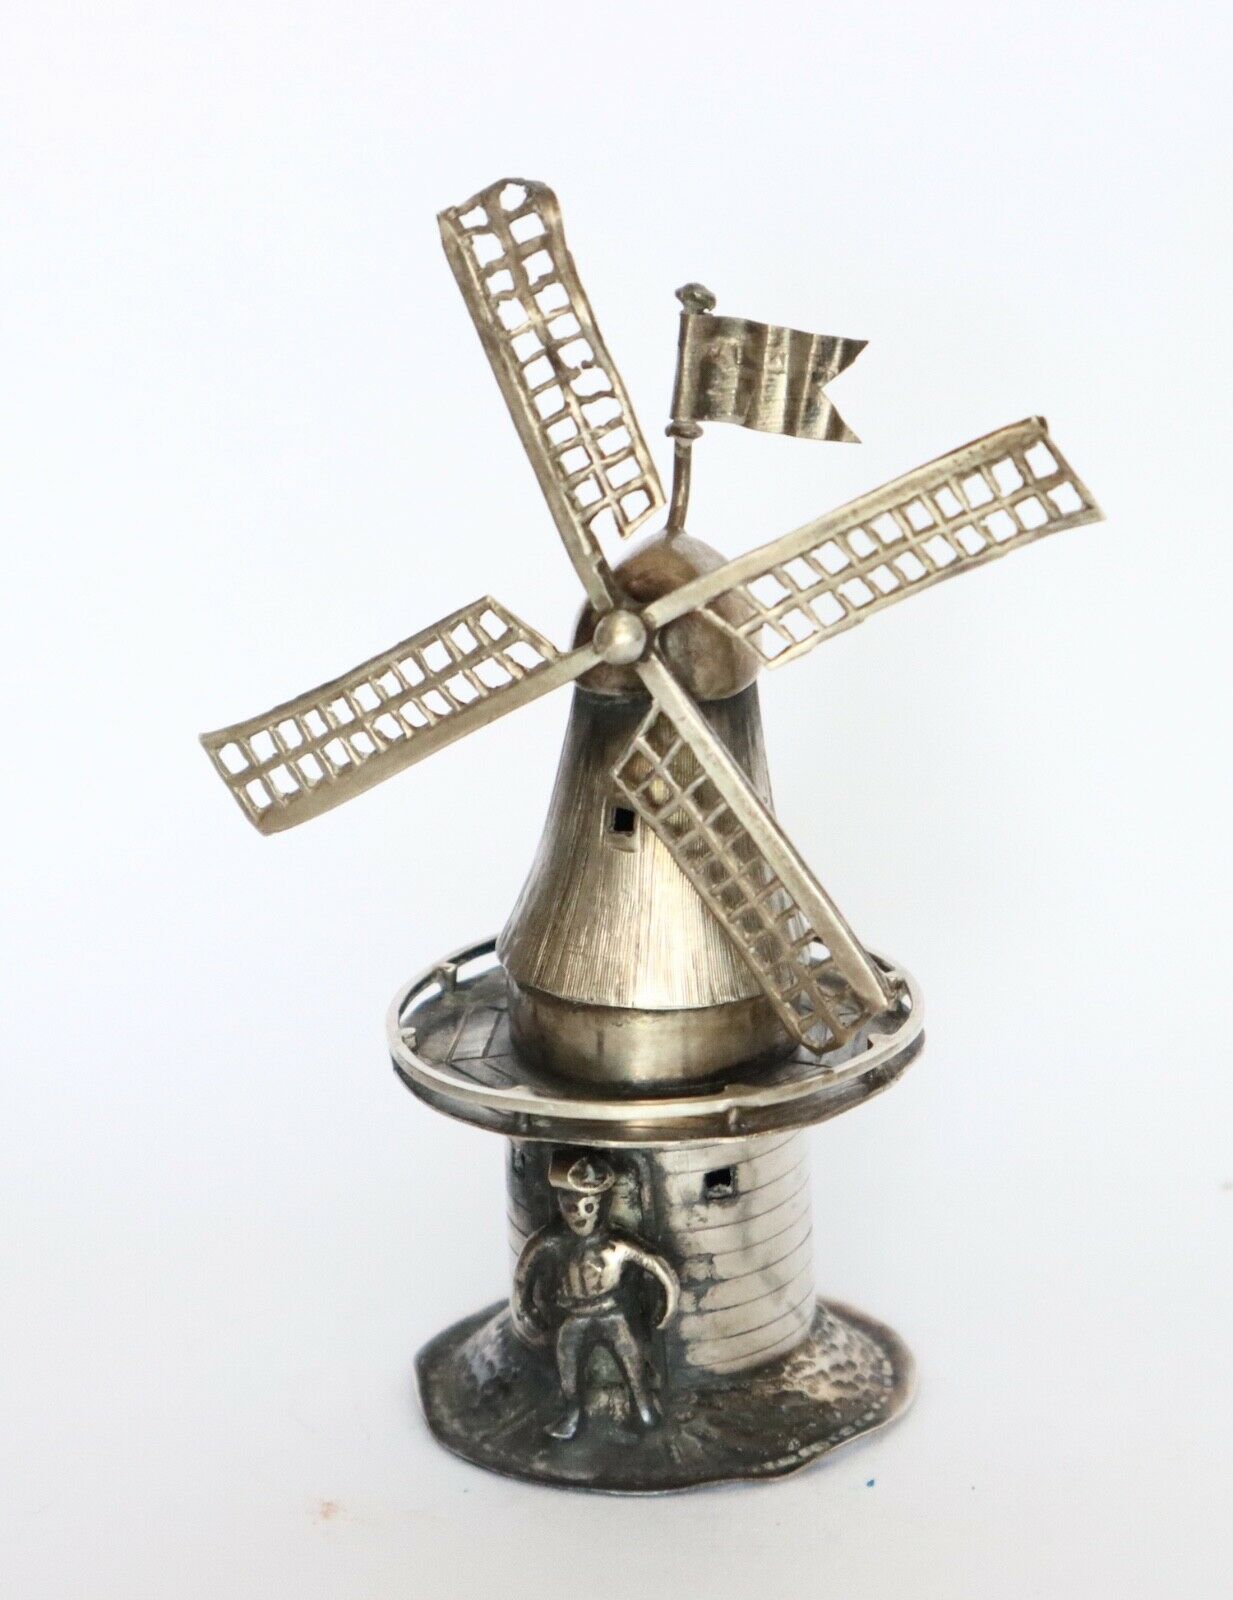 1900 Dutch Silver Miniature Of Windmill With Man Upfront.